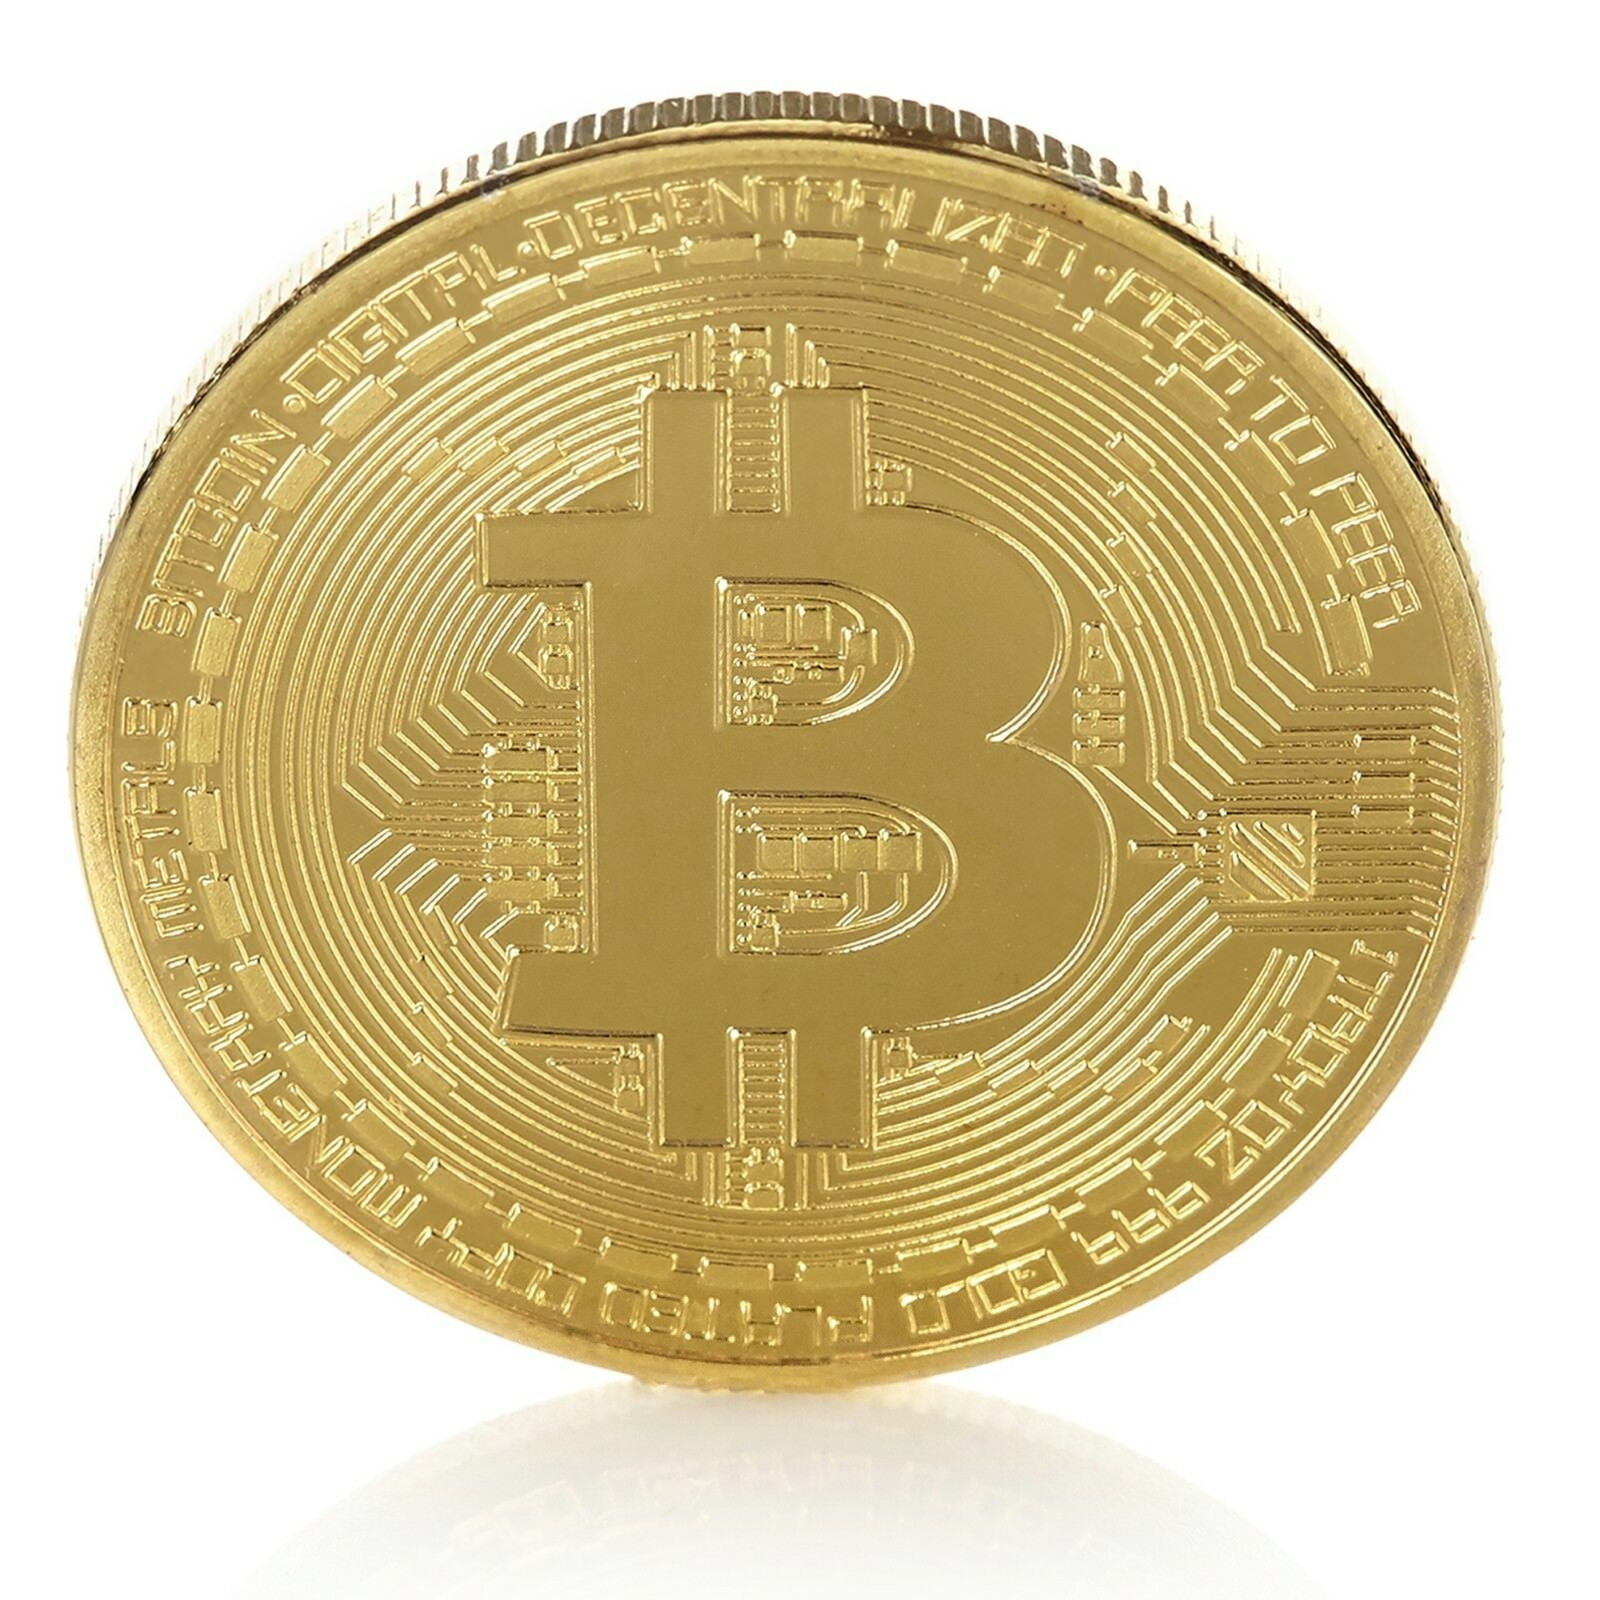 Bitcoin Gold Plated Btc Token Miner Cryptocurrency Commemorative Collection